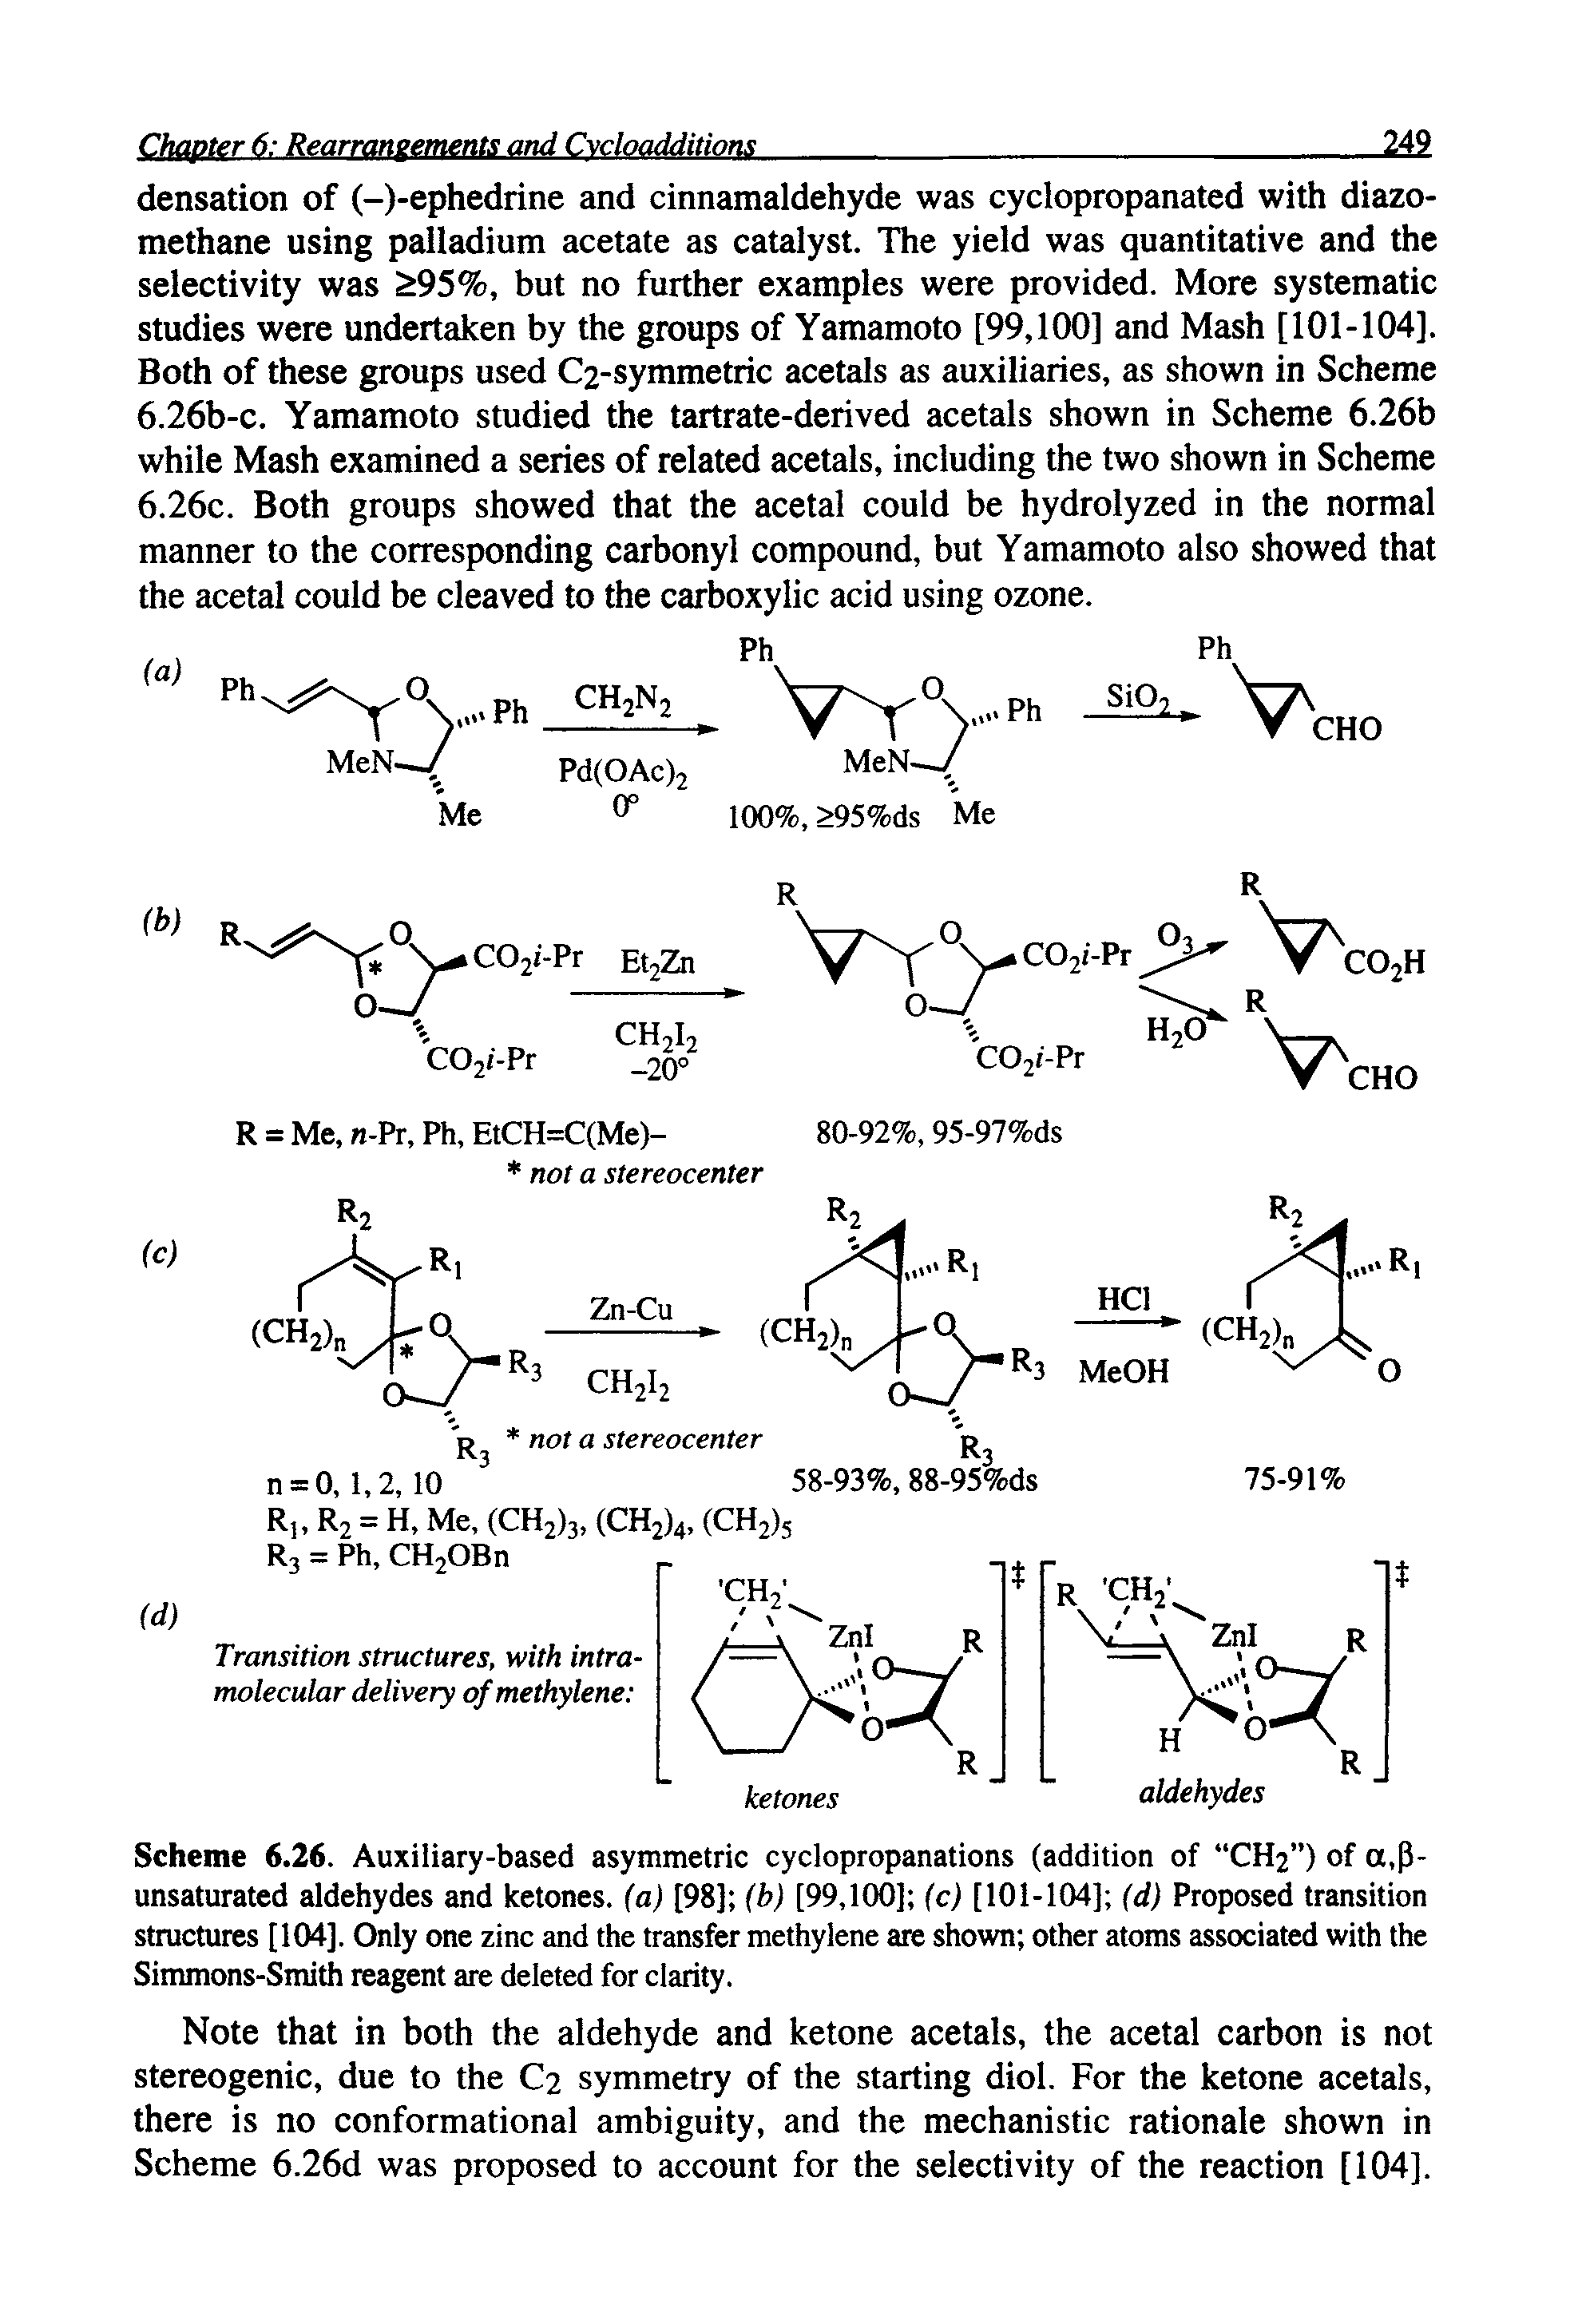 Scheme 6.26. Auxiliary-based asymmetric cyclopropanations (addition of CH2 ) of a, 3-unsaturated aldehydes and ketones, (a) [98] (b) [99,100] (c) [101-104] (d) Proposed transition structures [104]. Only one zinc and the transfer methylene are shown other atoms associated with the Simmons-Smith reagent are deleted for clarity.